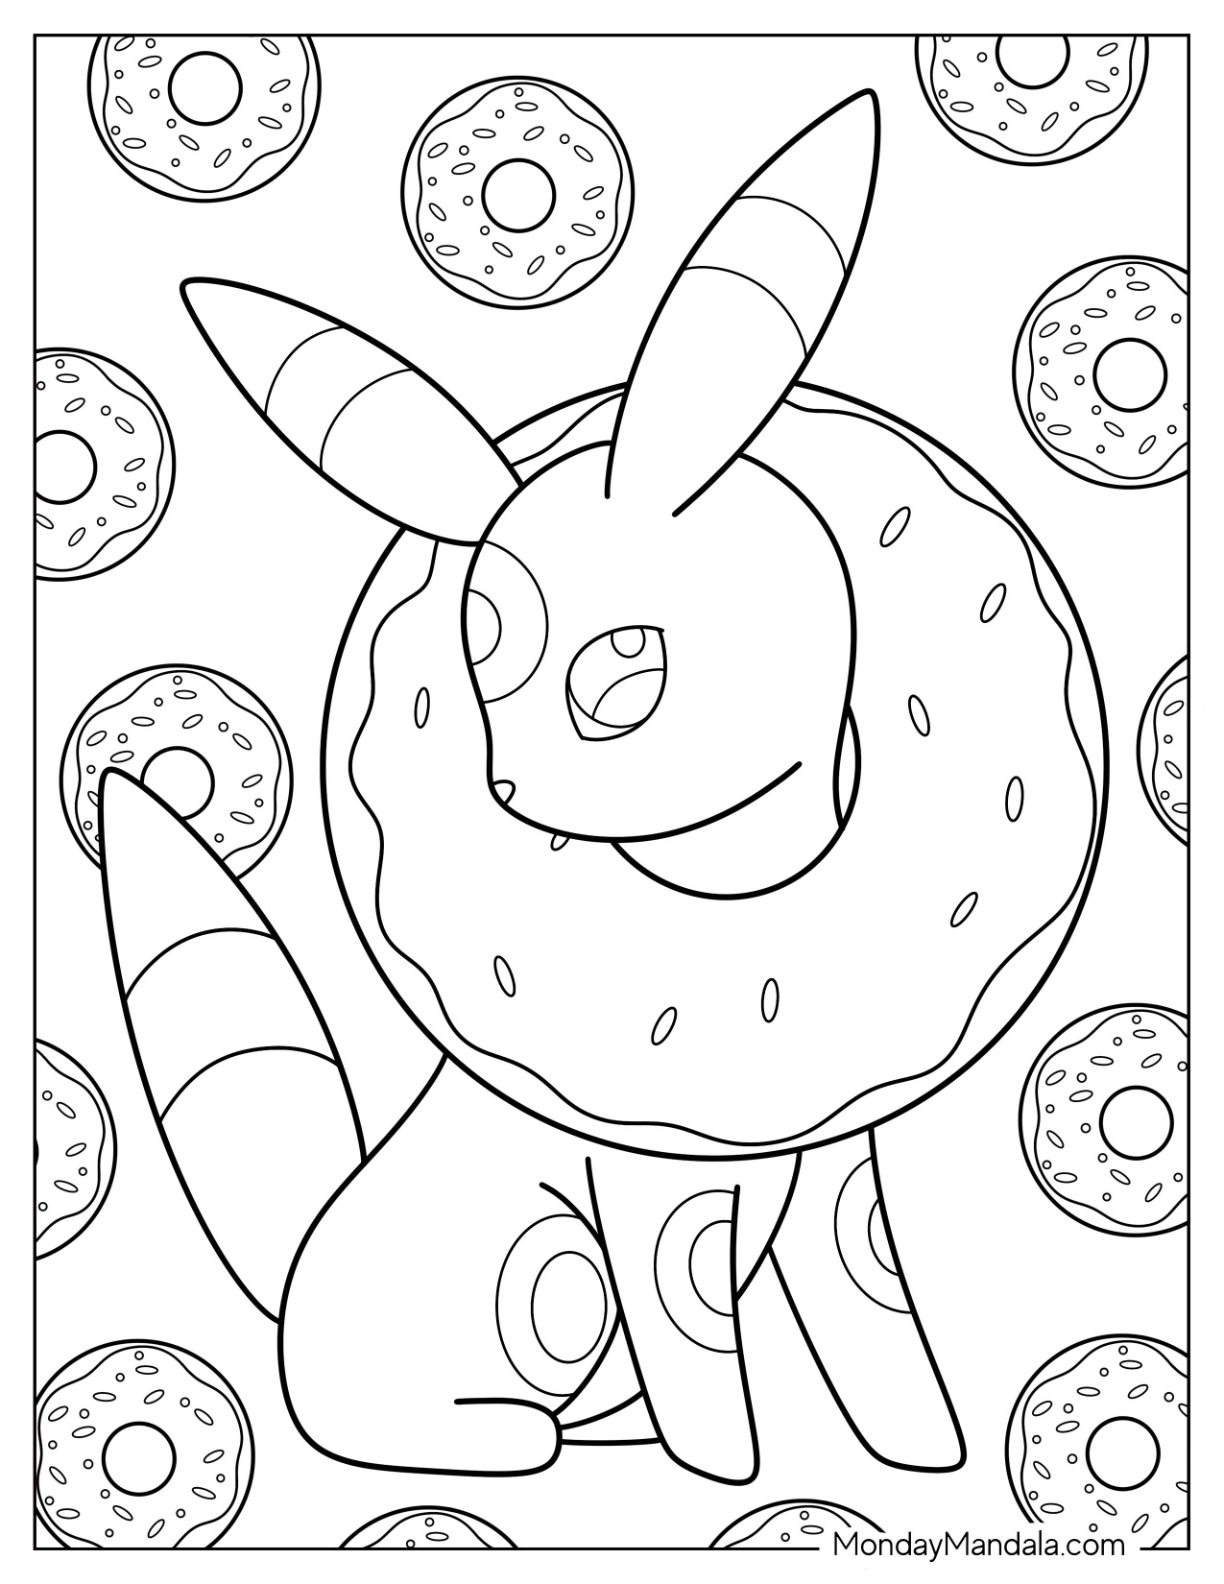 Umbreon coloring pages free pdf printables